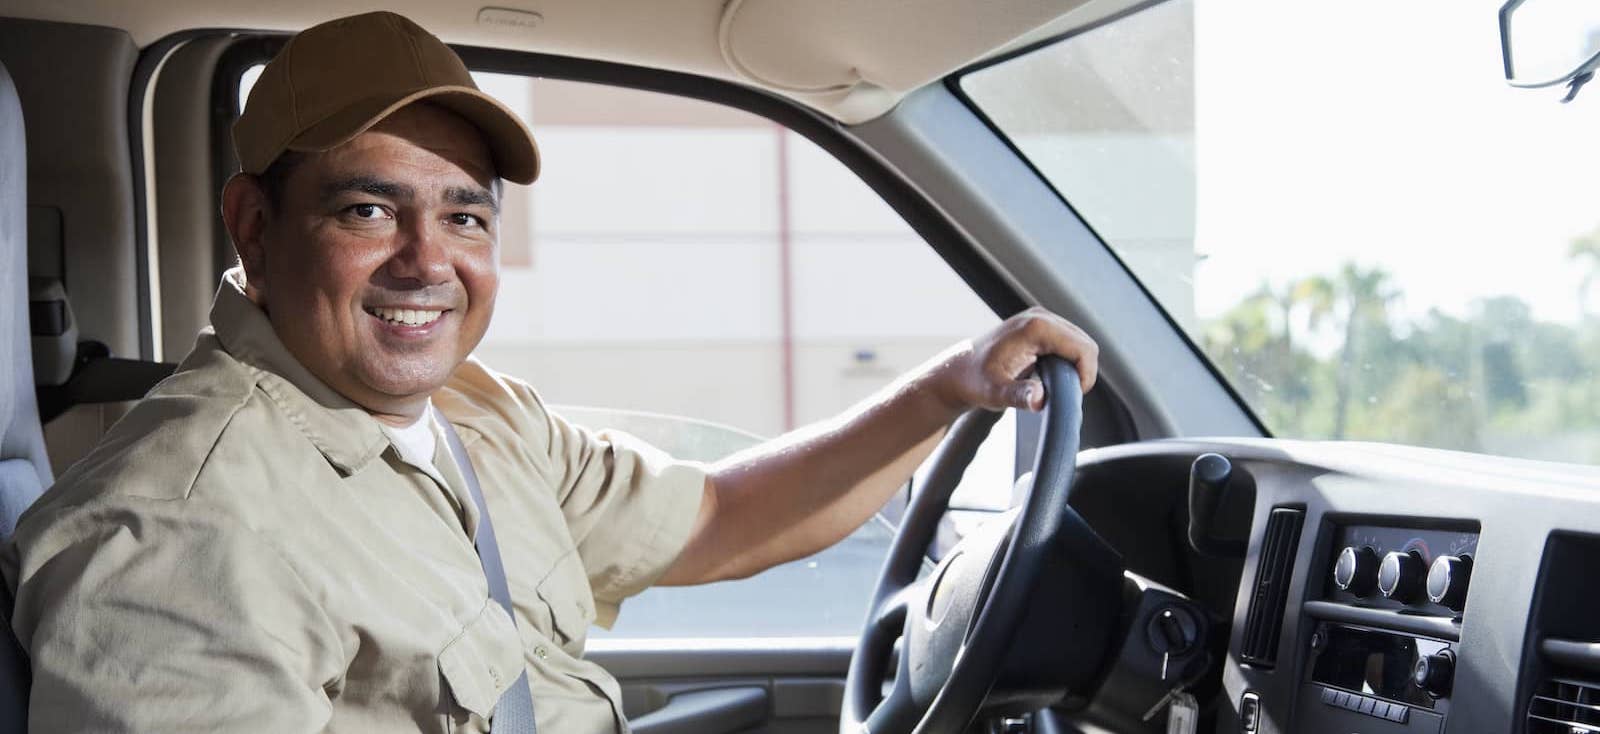 Truck driver smiling while sitting inside truck